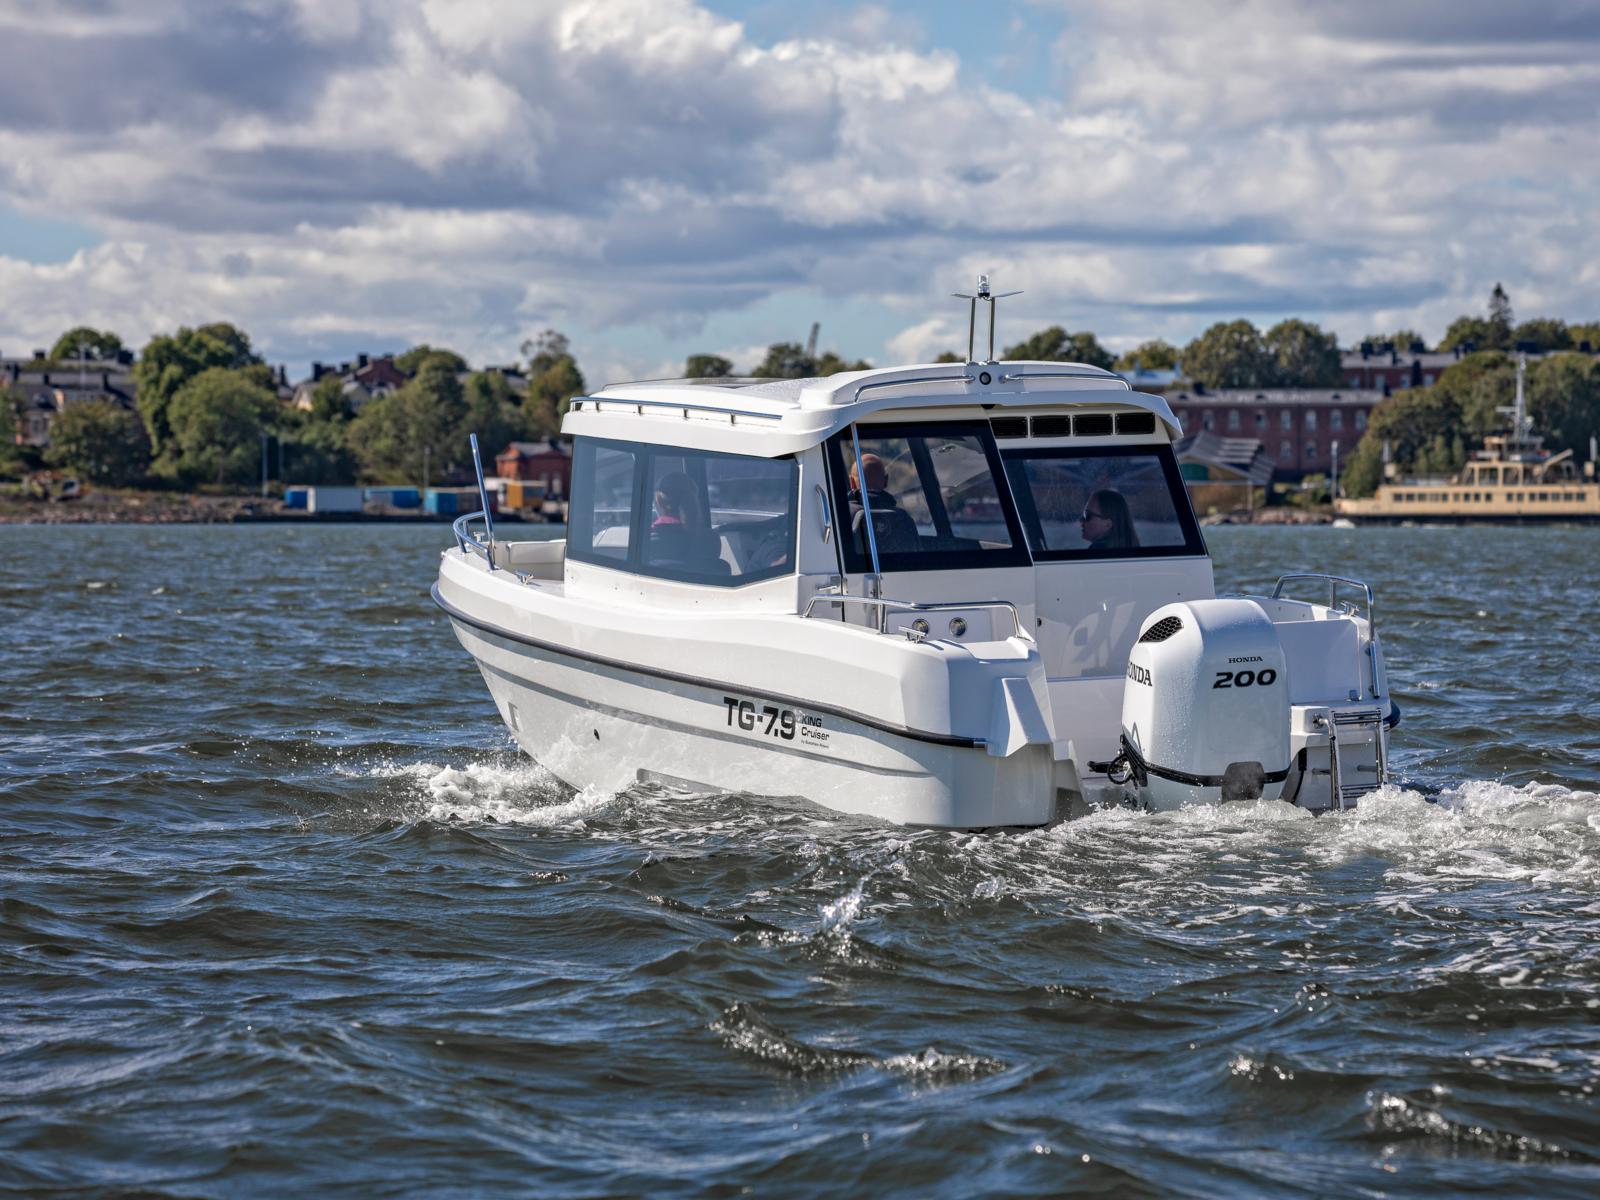 TG 7.9 | Boat Solutions, Utting am Ammersee